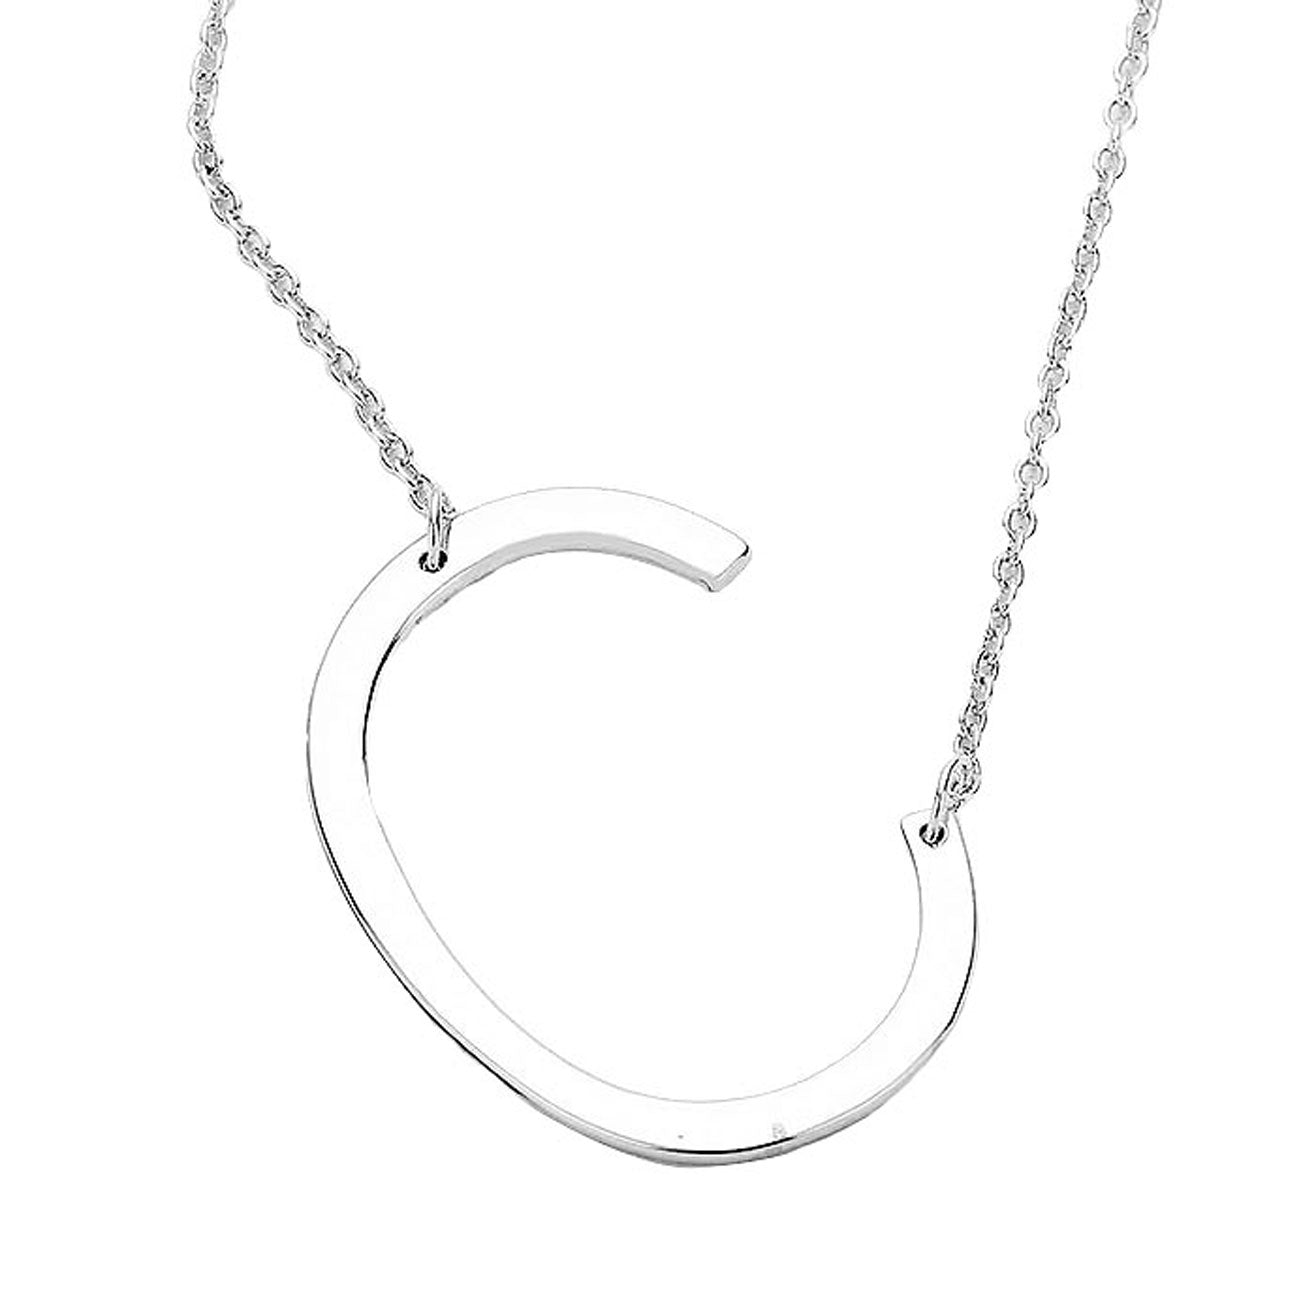 Silver C Monogram Metal Pendant Necklace. Beautifully crafted design adds a gorgeous glow to any outfit. Jewelry that fits your lifestyle! Perfect Birthday Gift, Anniversary Gift, Mother's Day Gift, Anniversary Gift, Graduation Gift, Prom Jewelry, Just Because Gift, Thank you Gift.